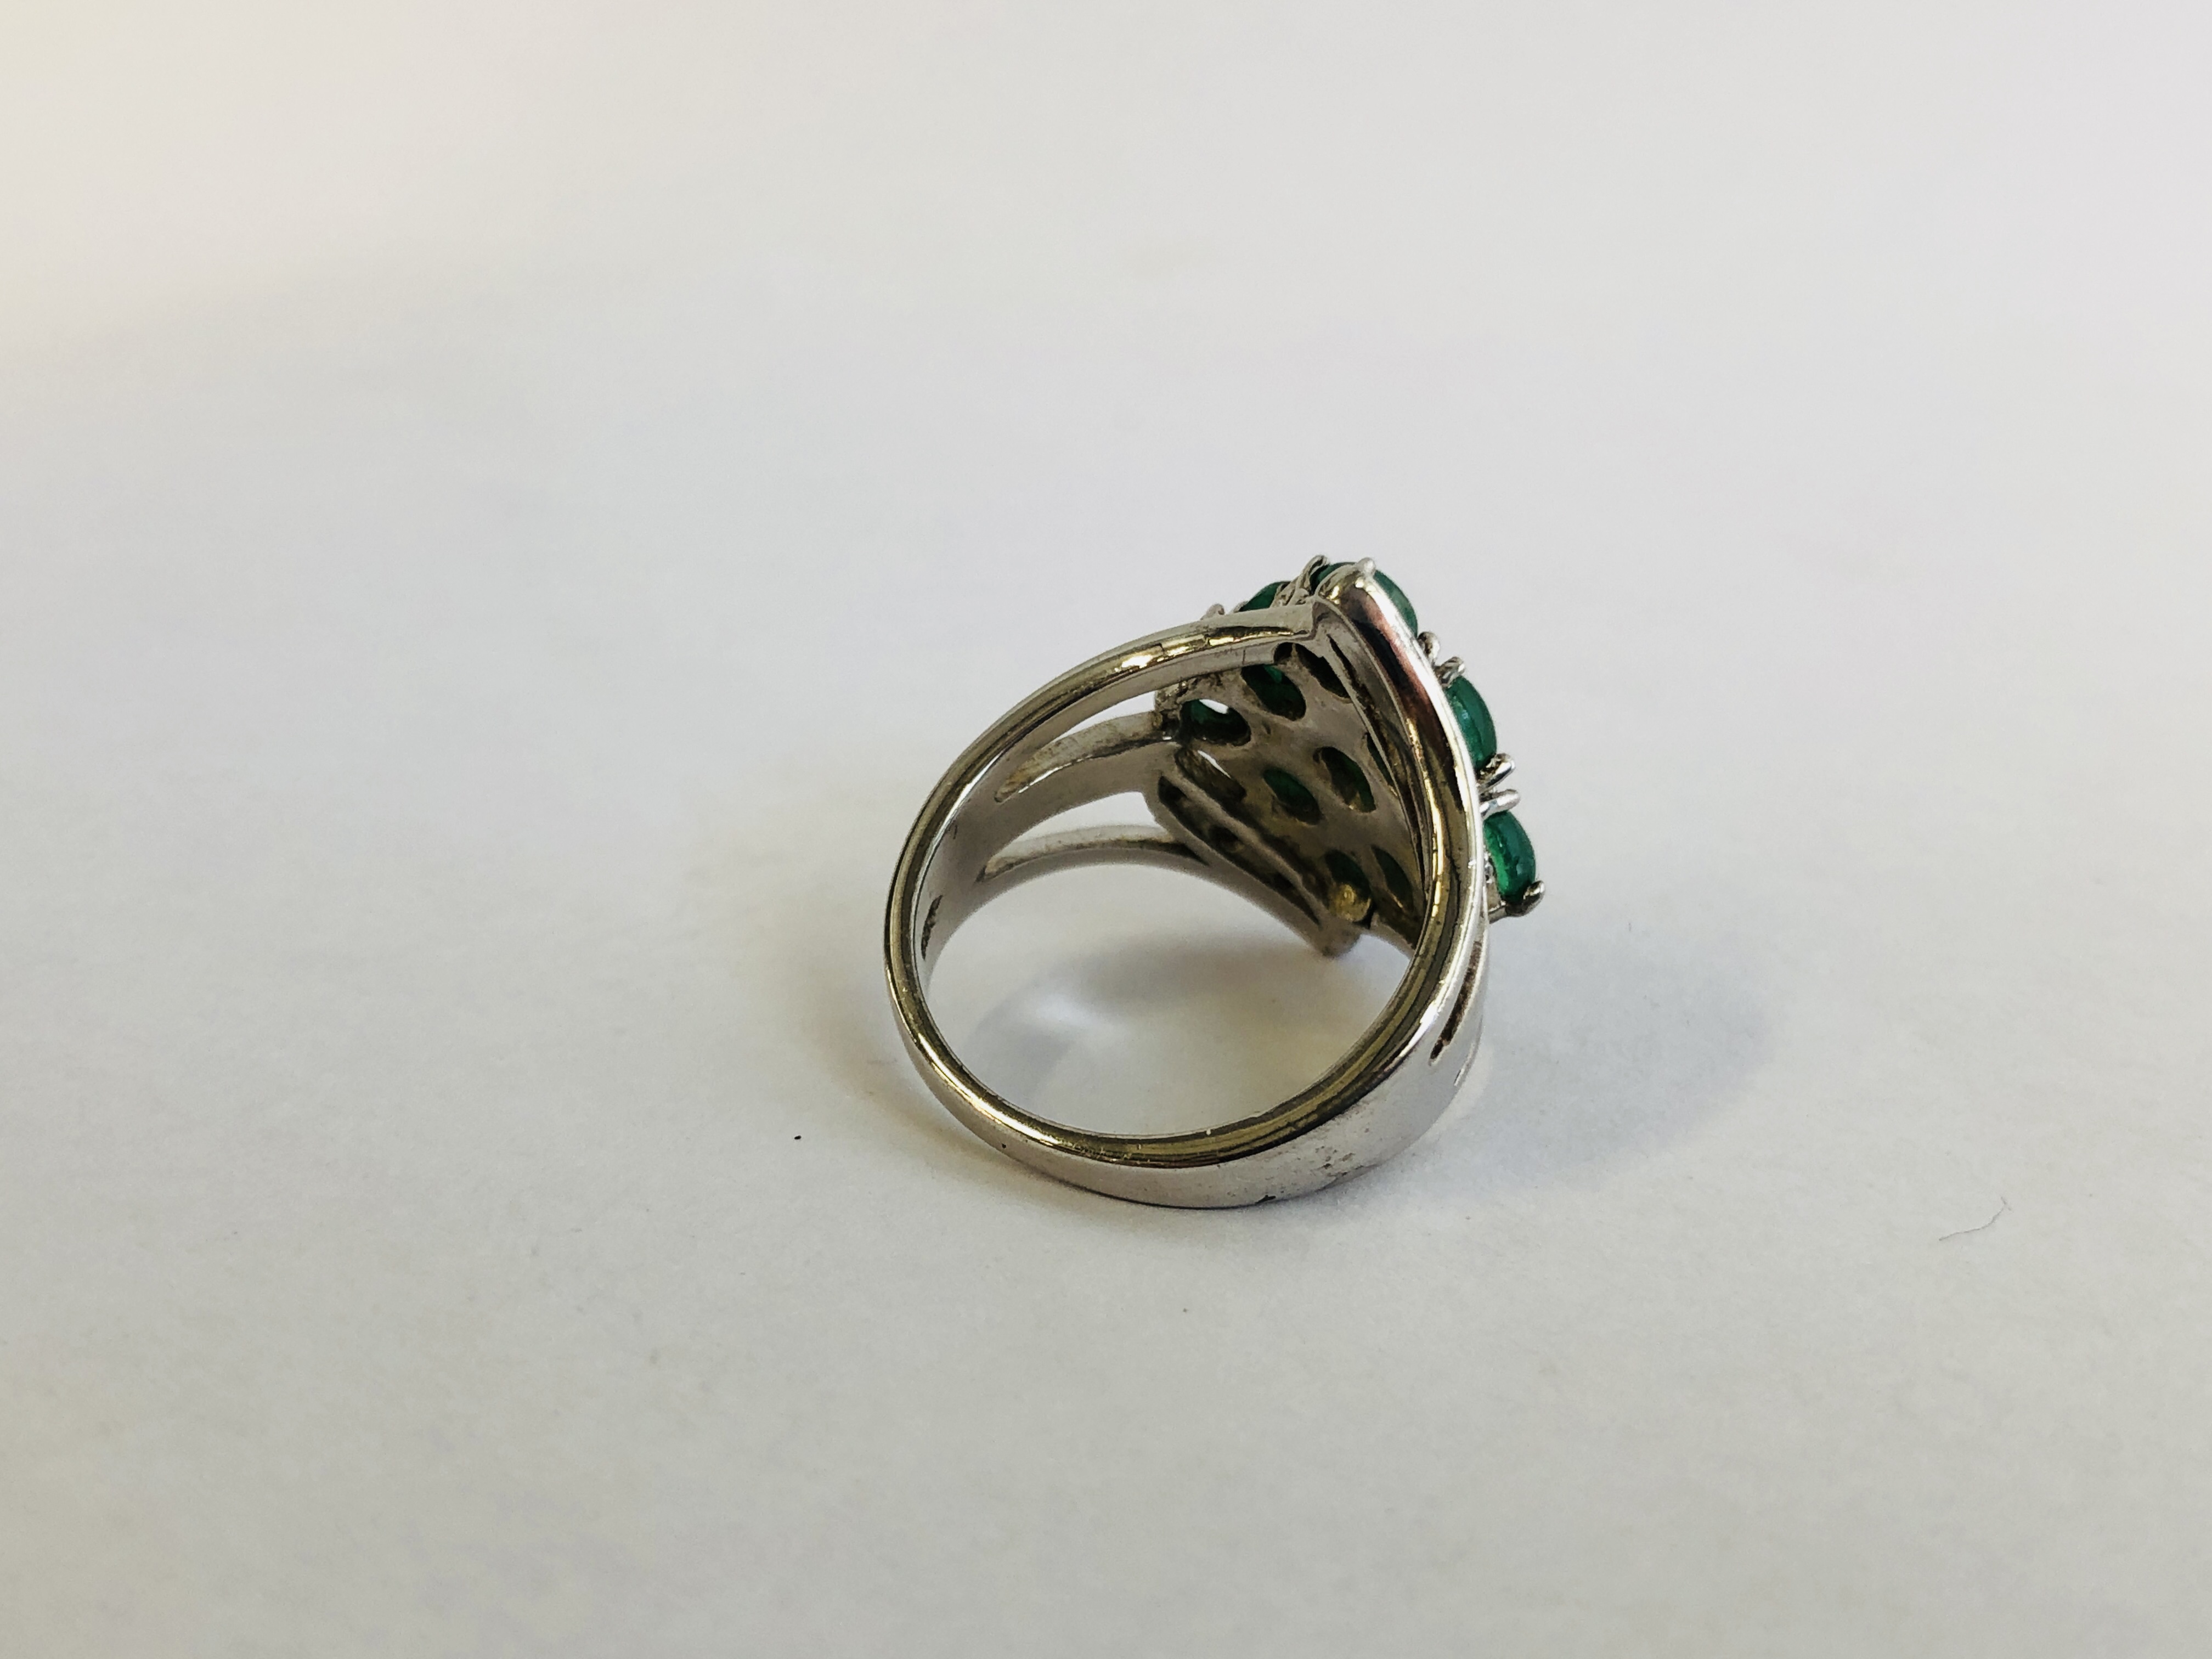 2 X DESIGNER SILVER RINGS, GREEN STONES IN A LOZENGE DESIGN AND CLAW SET DEEP PINK STONE. - Image 4 of 16